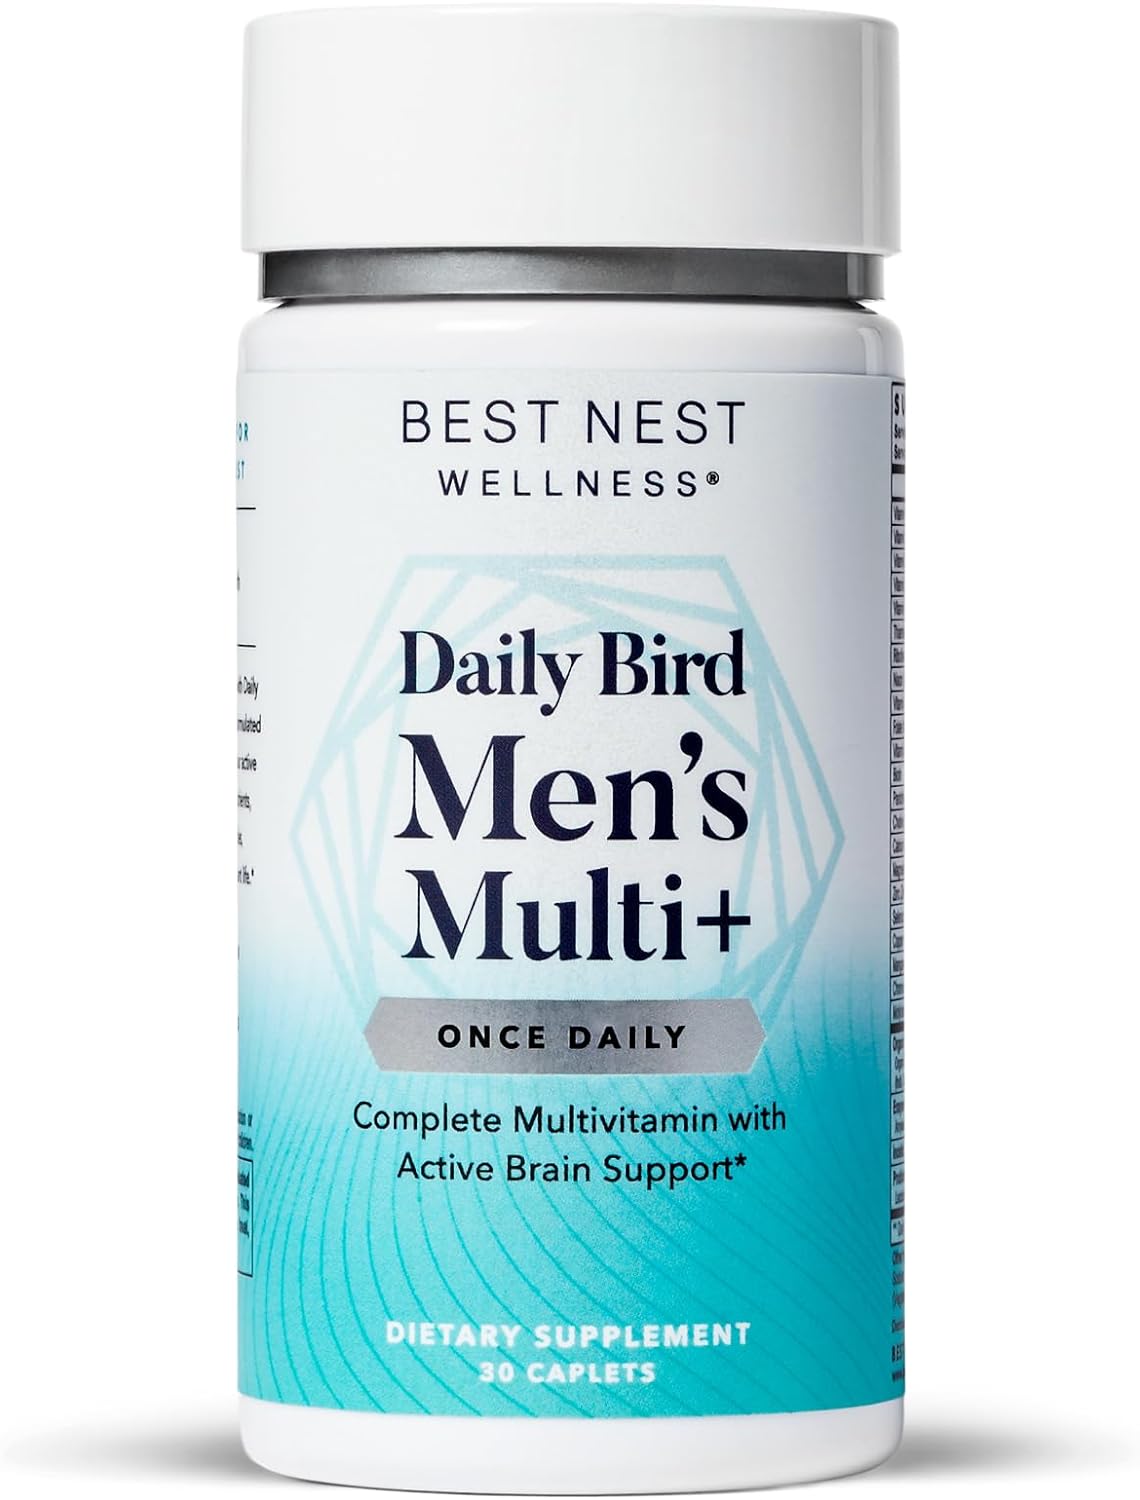 Best Nest Daily Bird Mens Multivitamin with Probiotics, Methylfolate, B12, with Whole Food Organic Blend, Once Daily Multivitamin Supplement, 30 Ct